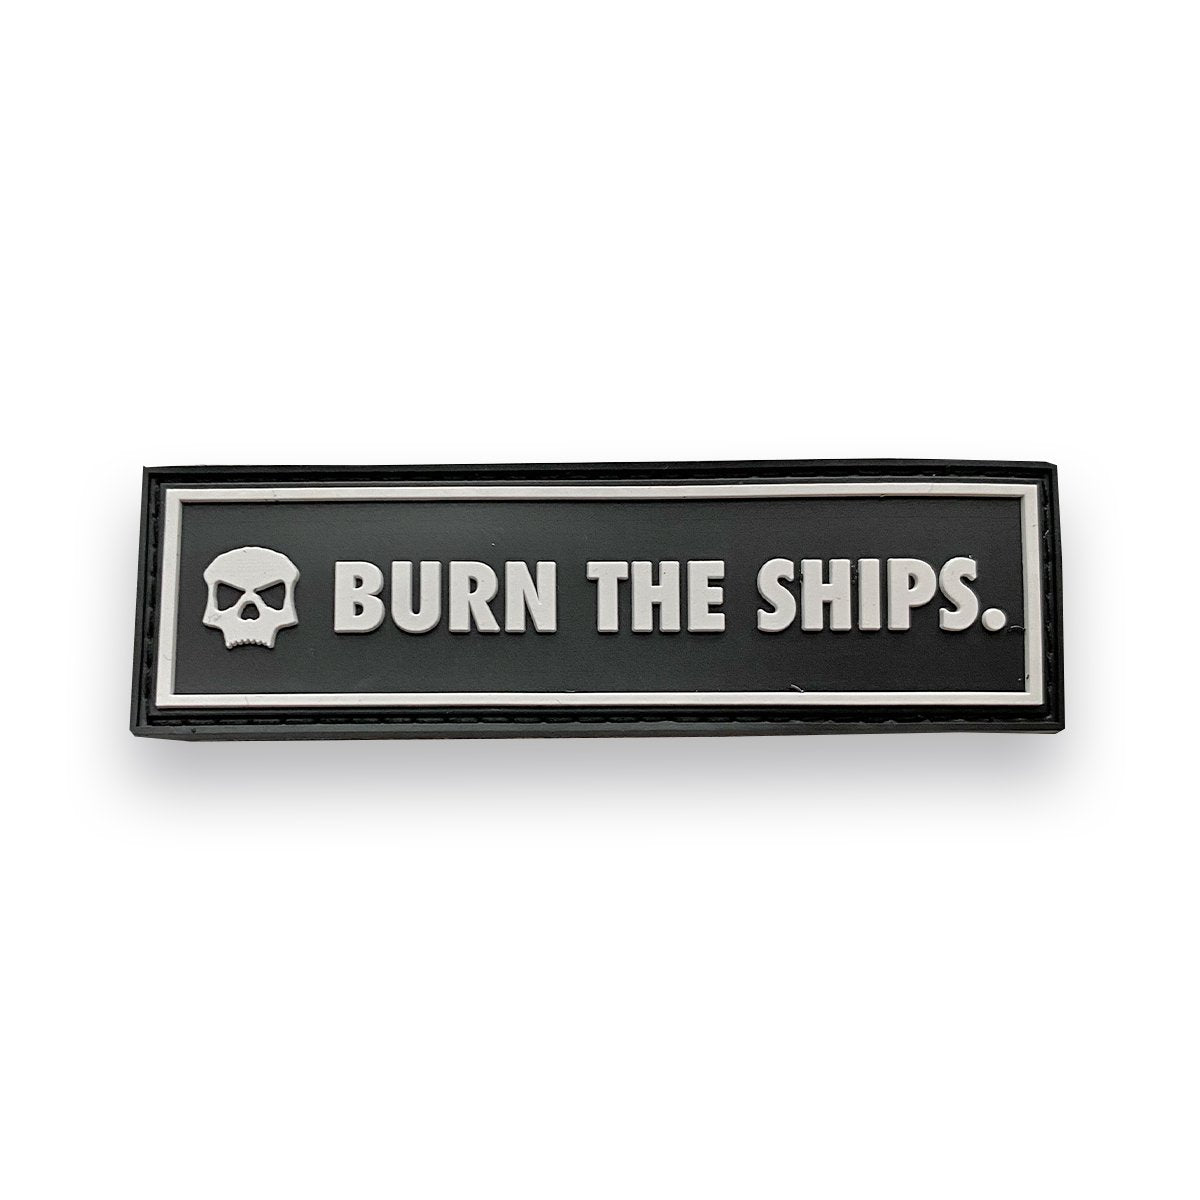 Infamous Paintball "Burn The Ships" Medium Style Patch - Black White